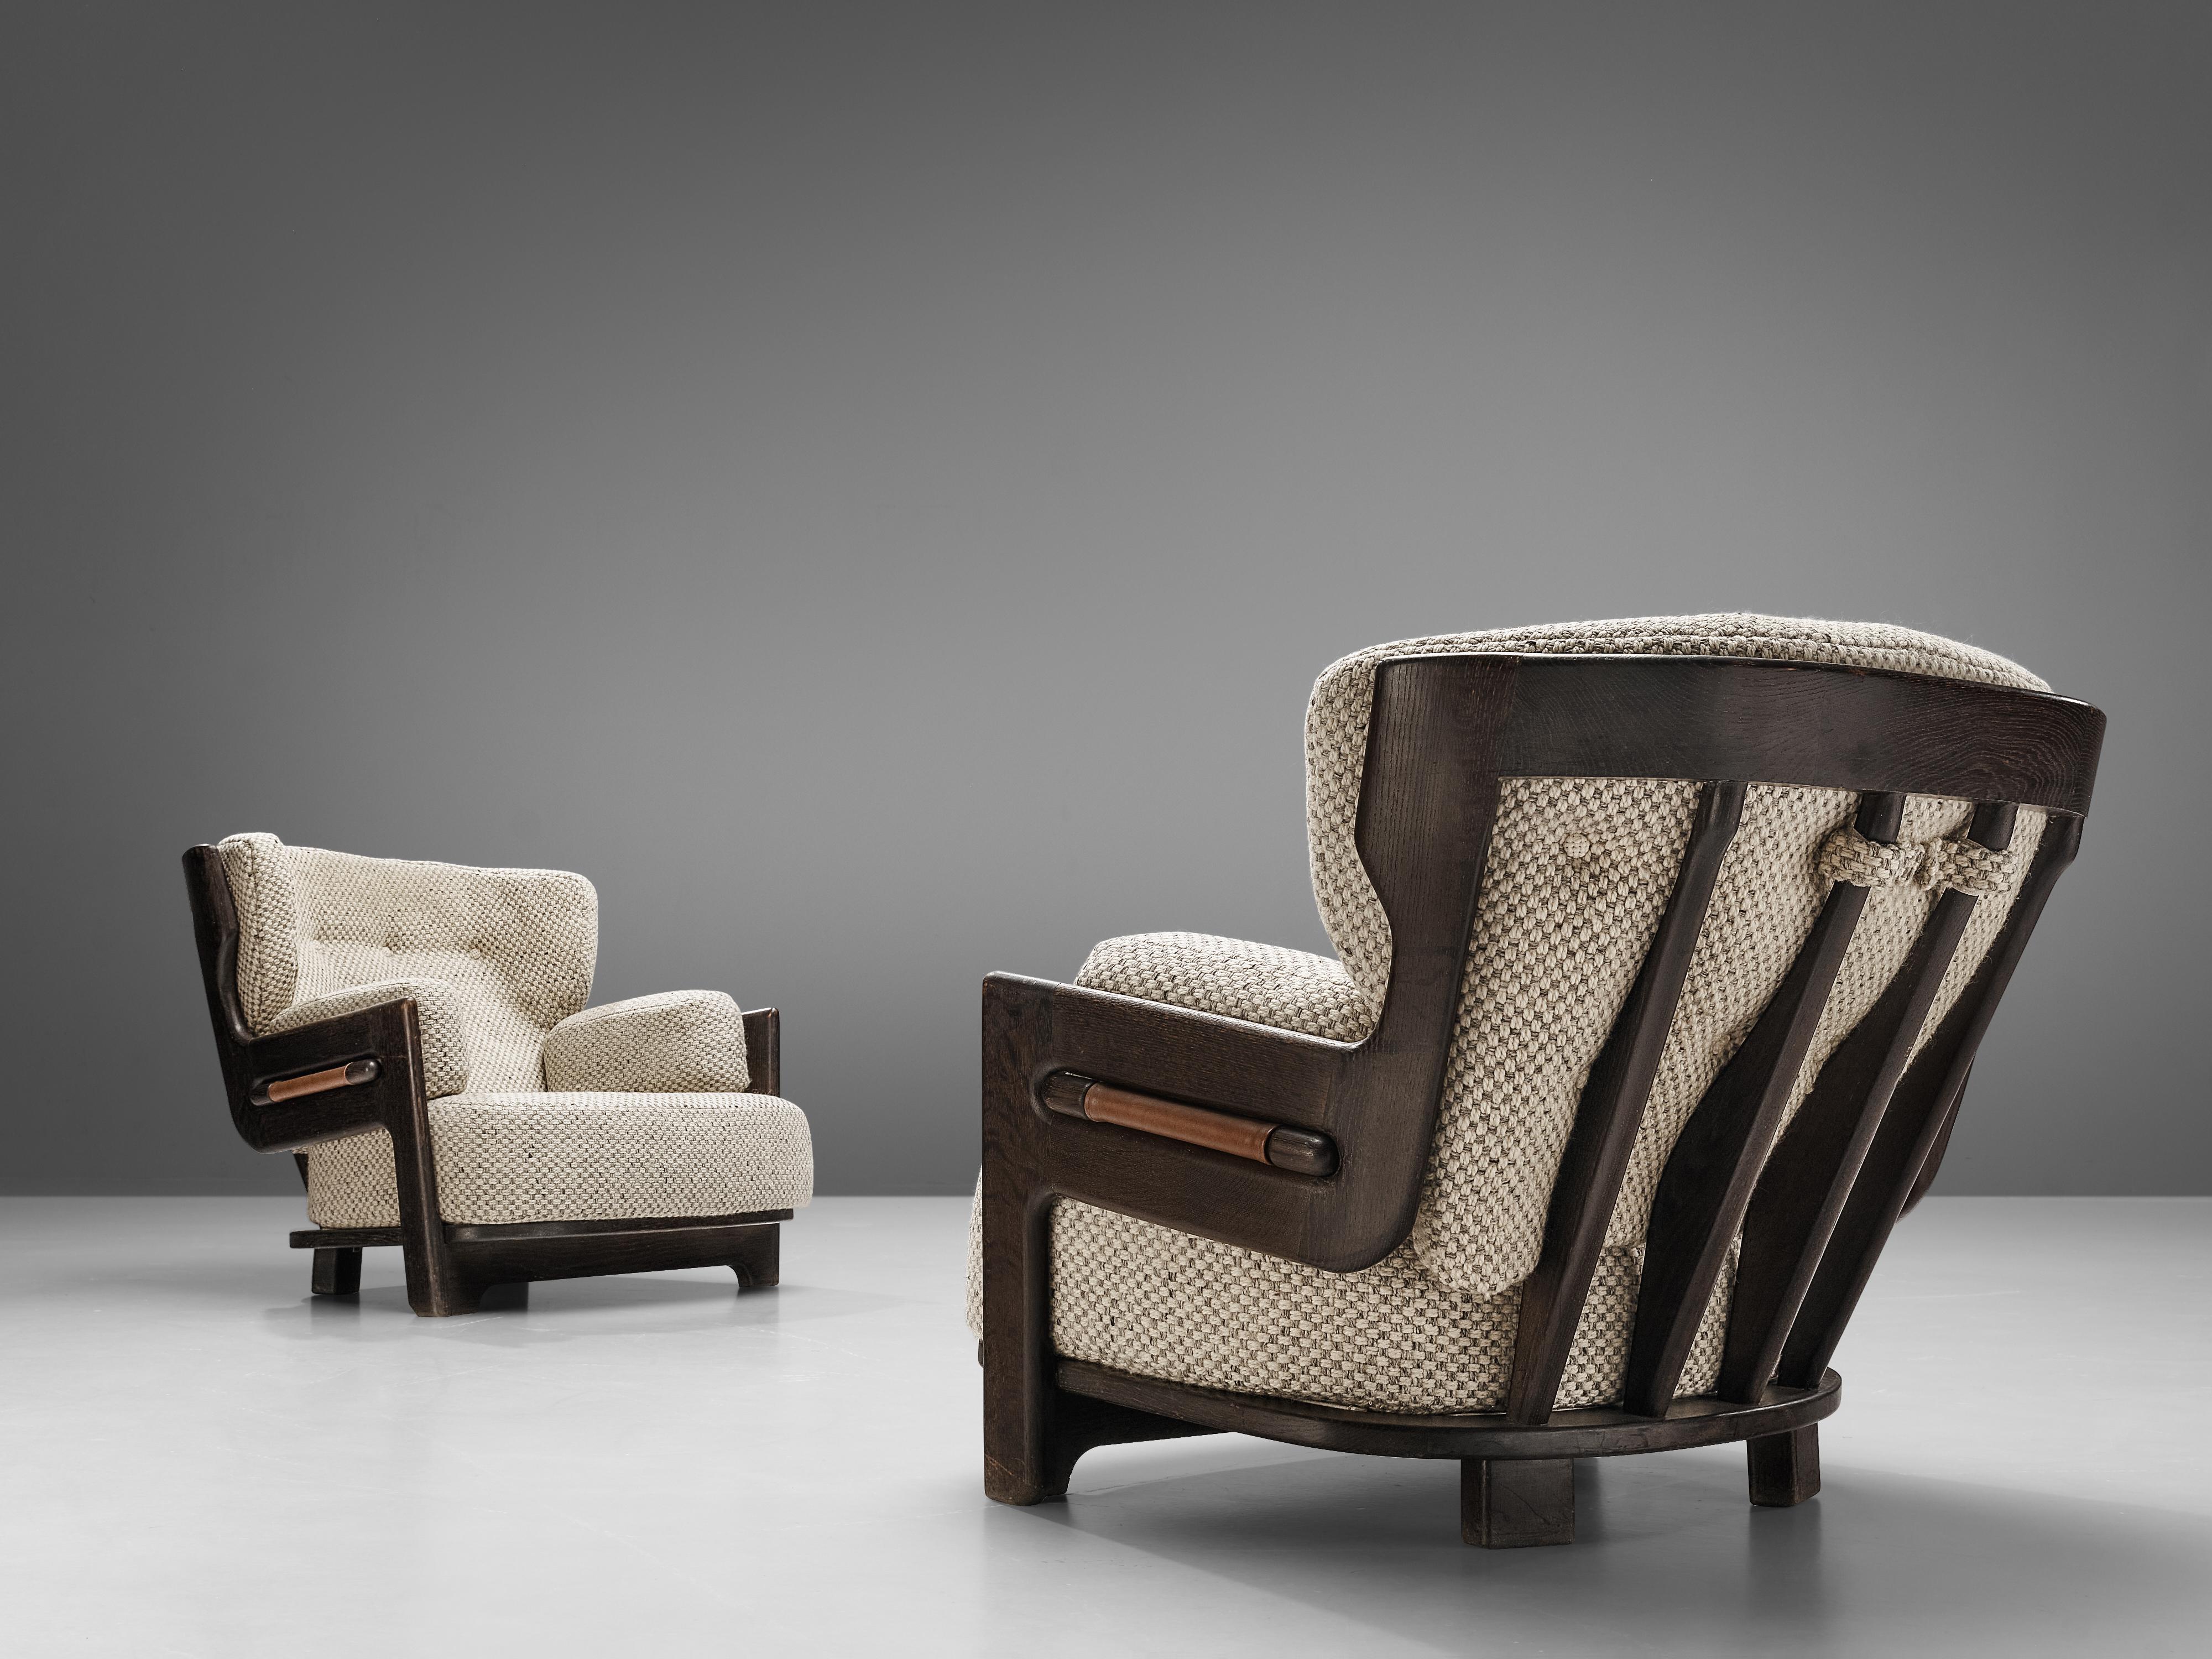 Guillerme & Chambron Pair of Lounge Chairs 'Denis' with Dark Brown Frames  1